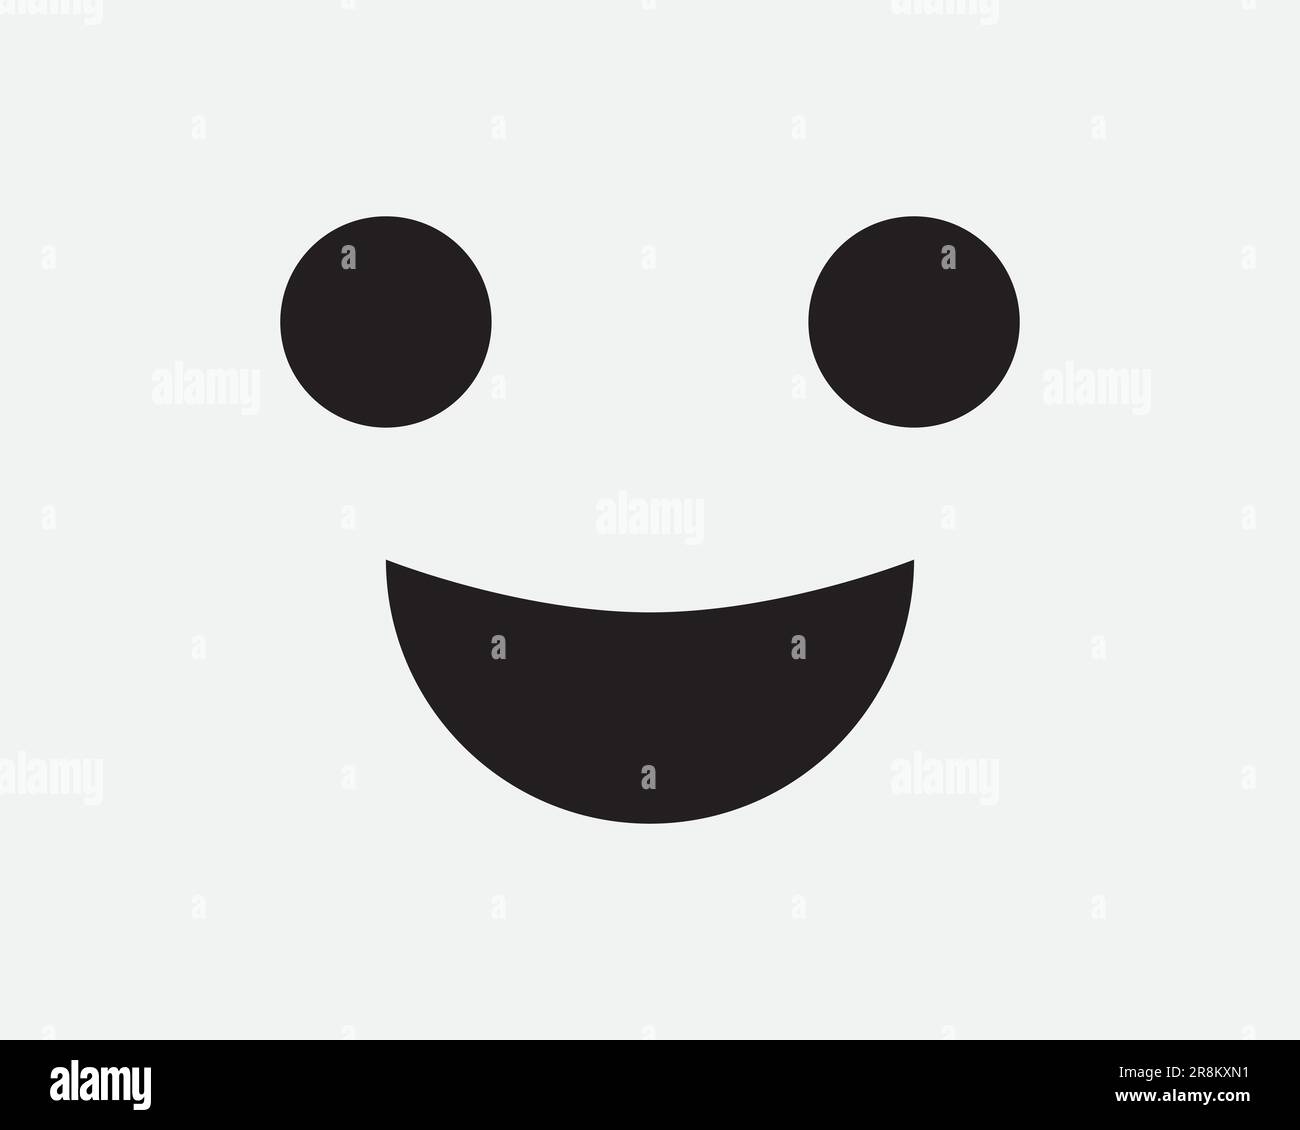 Smiley Face Icon. Eye Eyes Mouth Emotion Smile Happy Facial Expression Laugh. Black White Sign Symbol Illustration Artwork Graphic Clipart EPS Vector Stock Vector